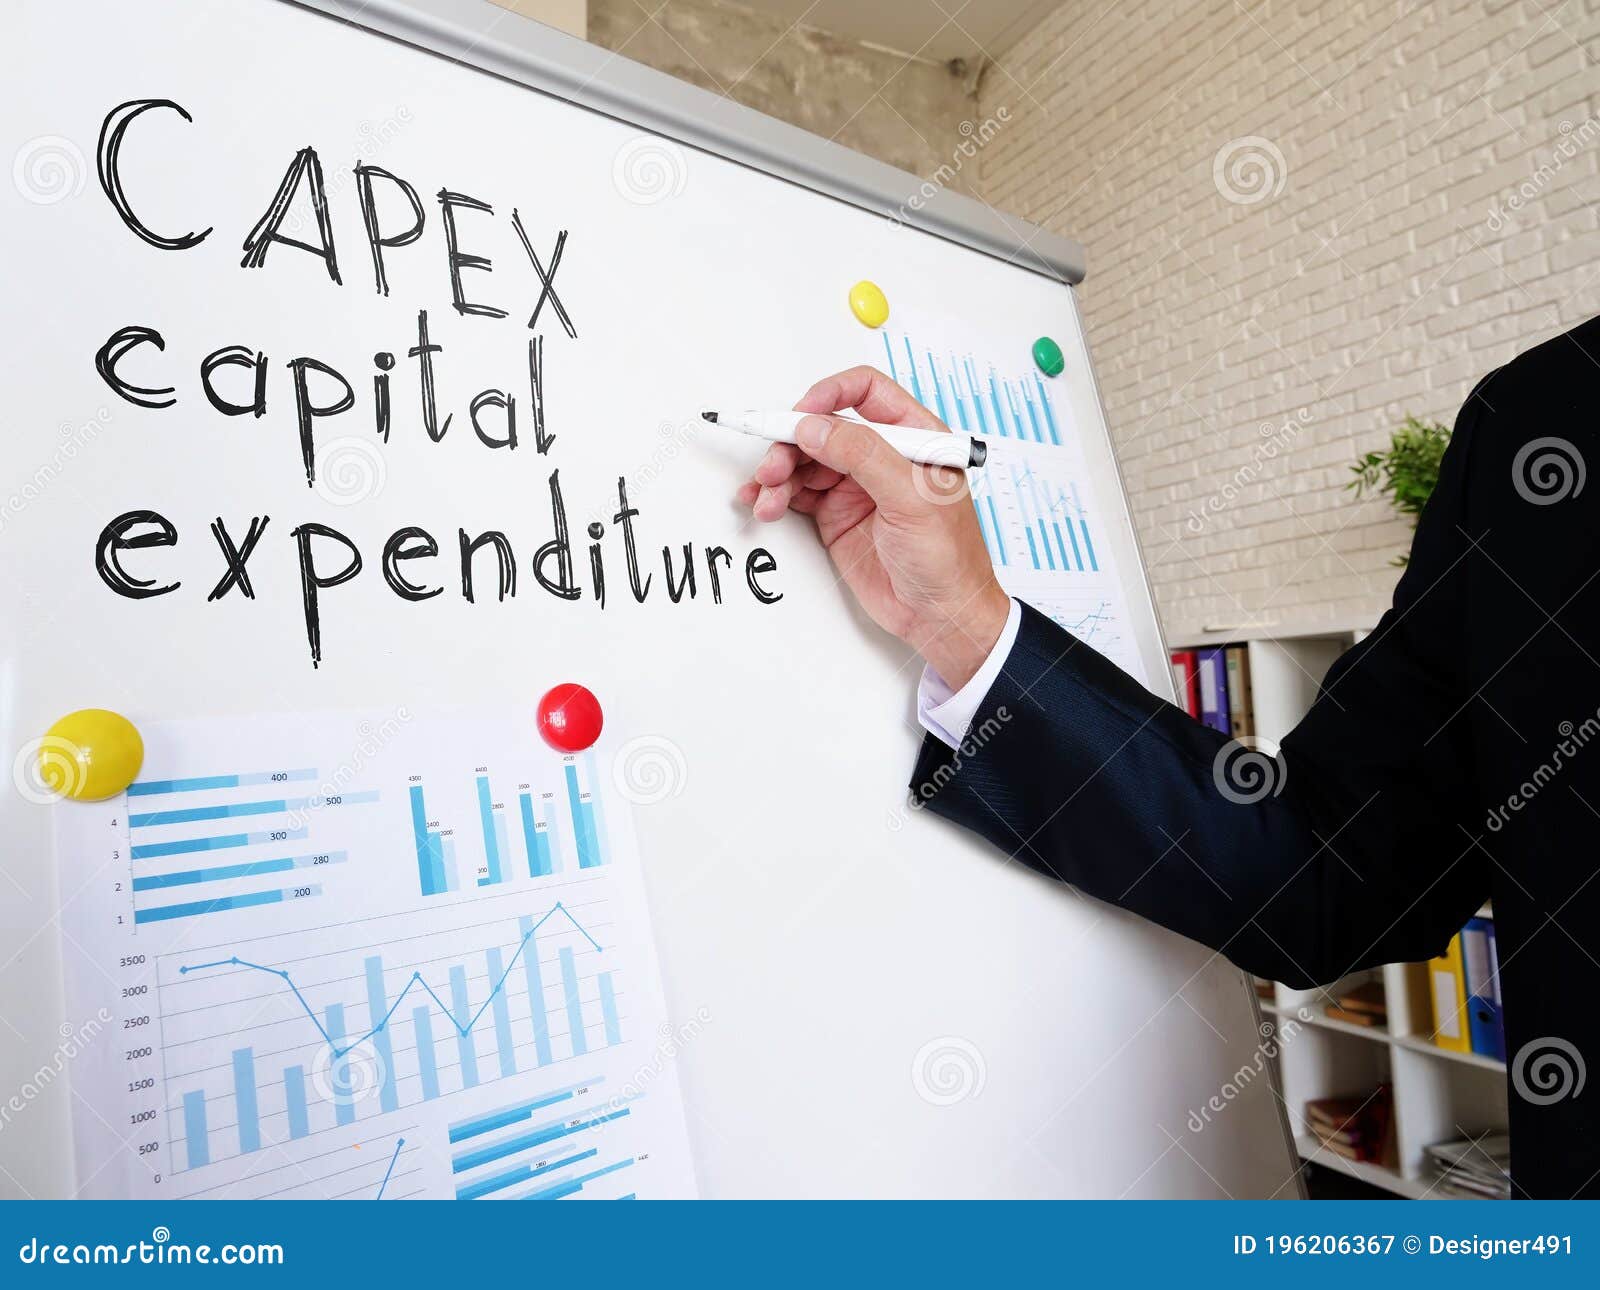 capex capital expenditure written by financial advisor.